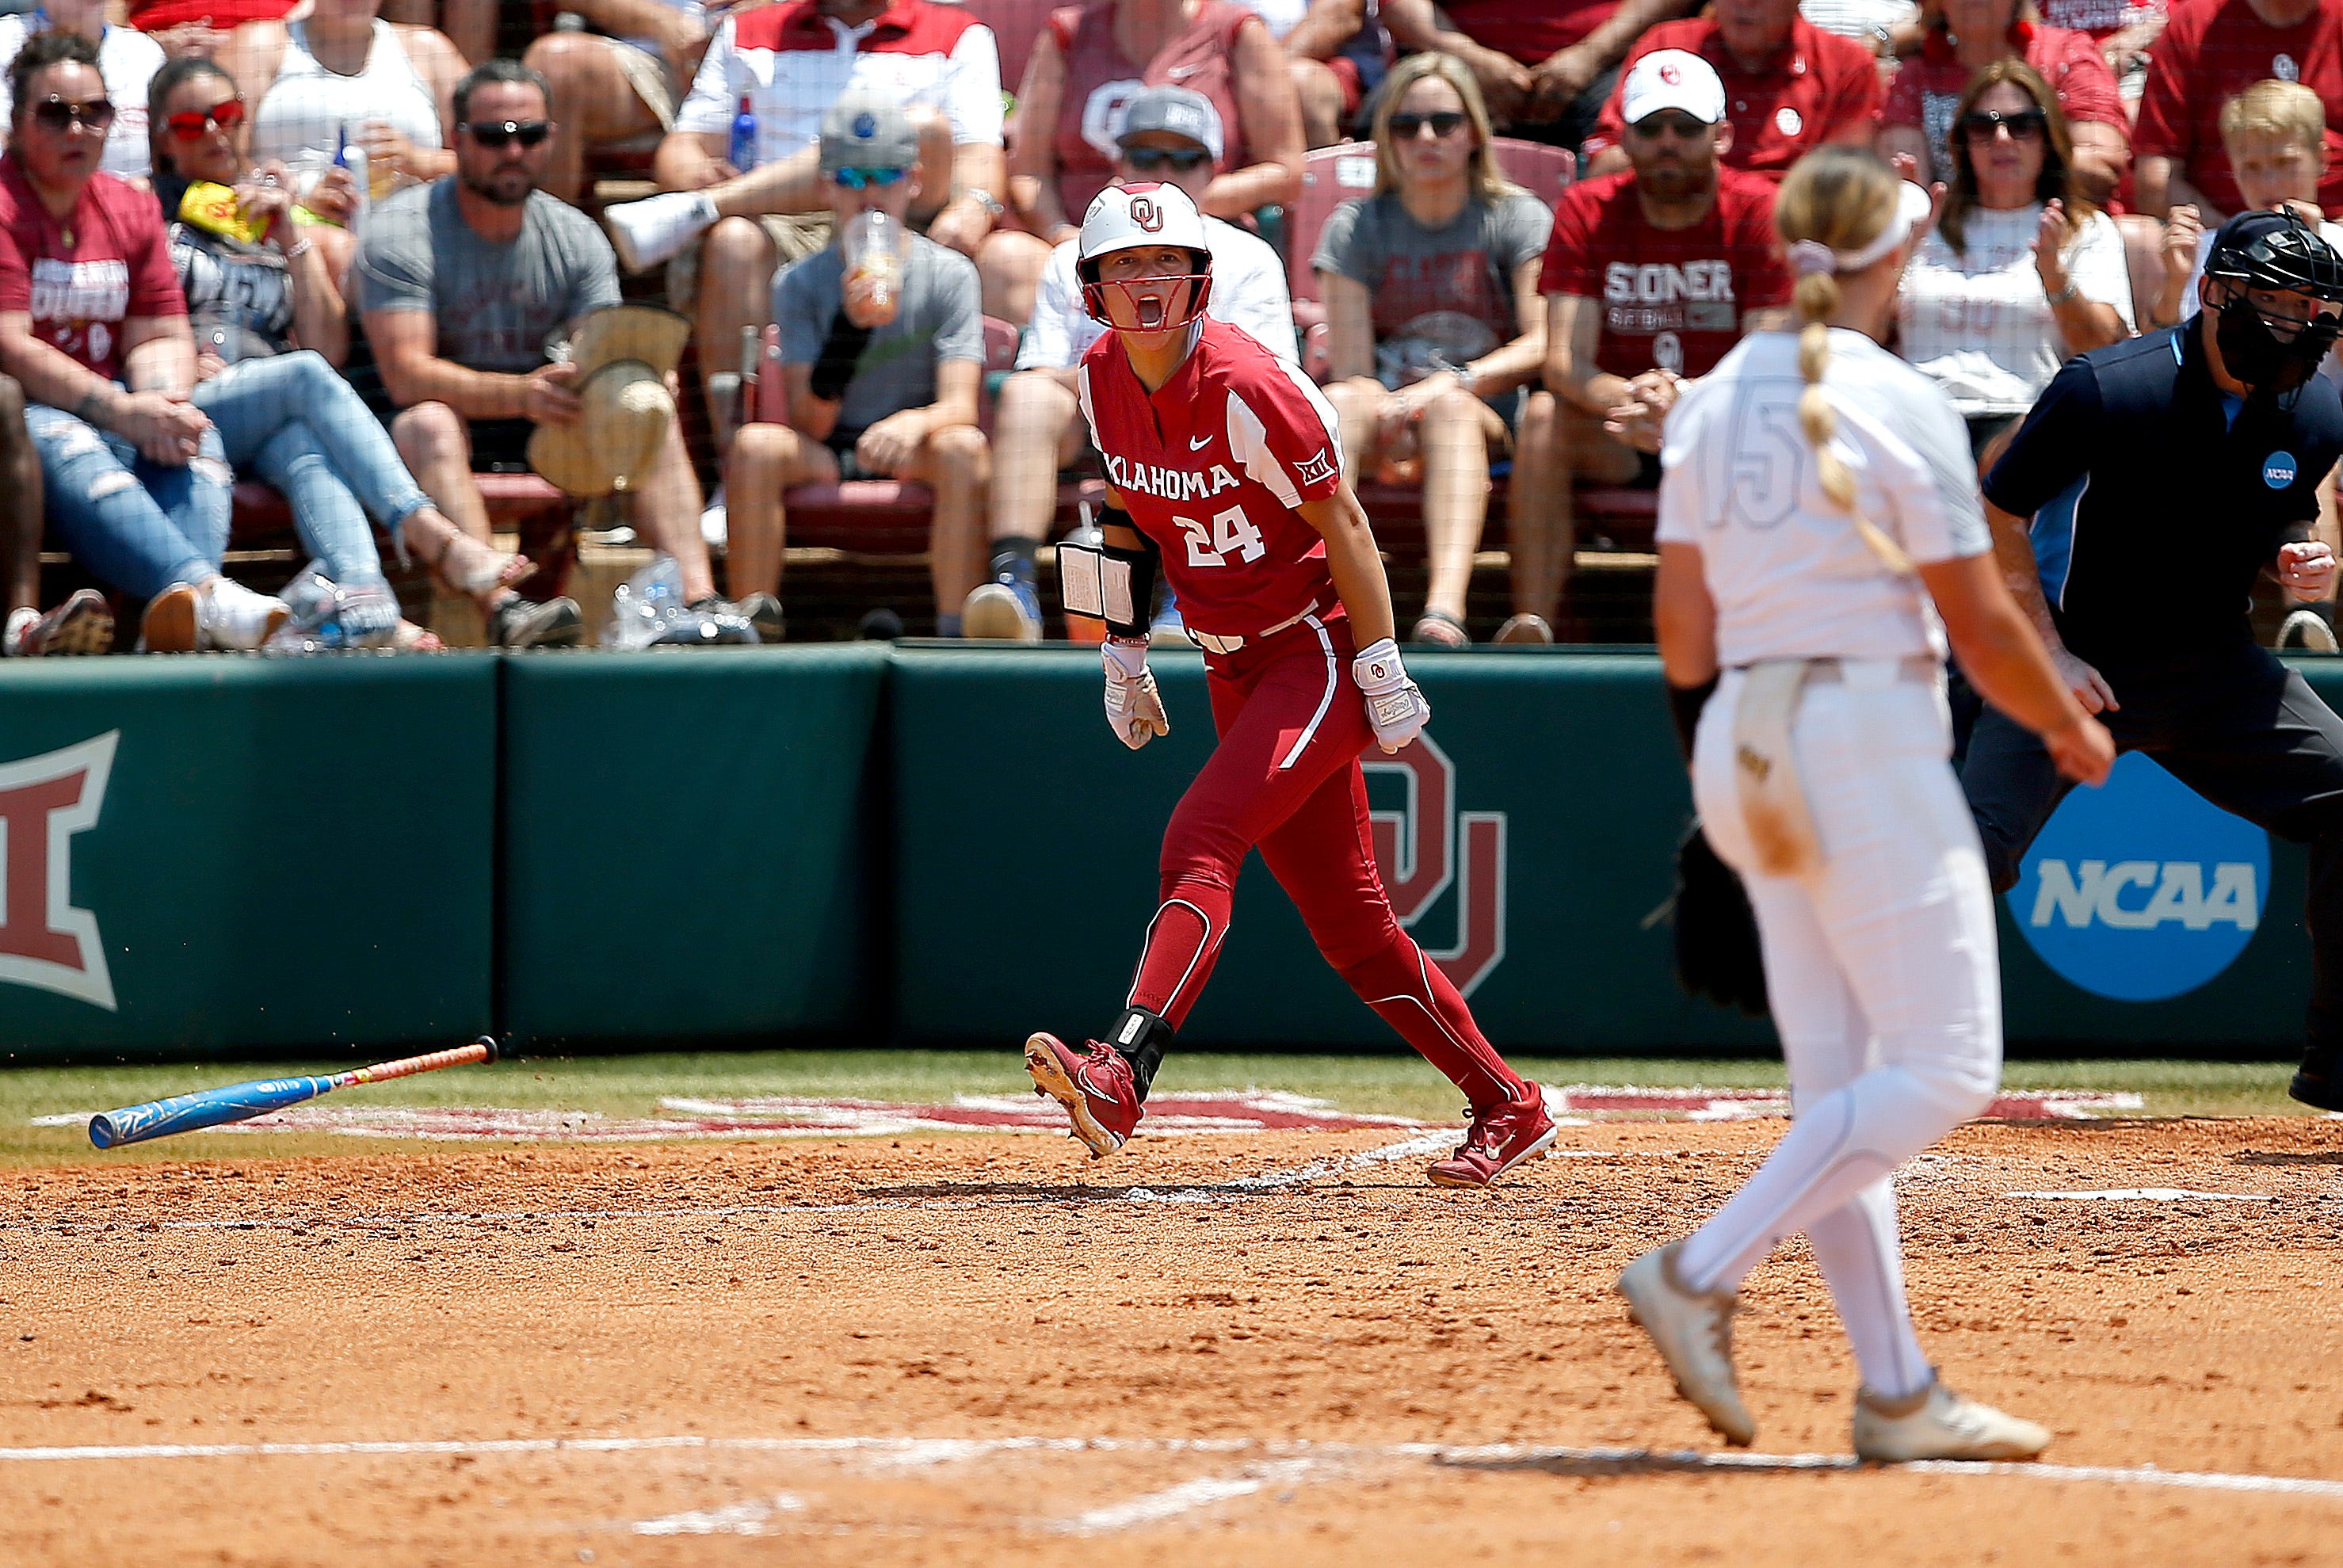 Oklahoma Softball: Meet OU’s Opponents at the 2022 WCWS